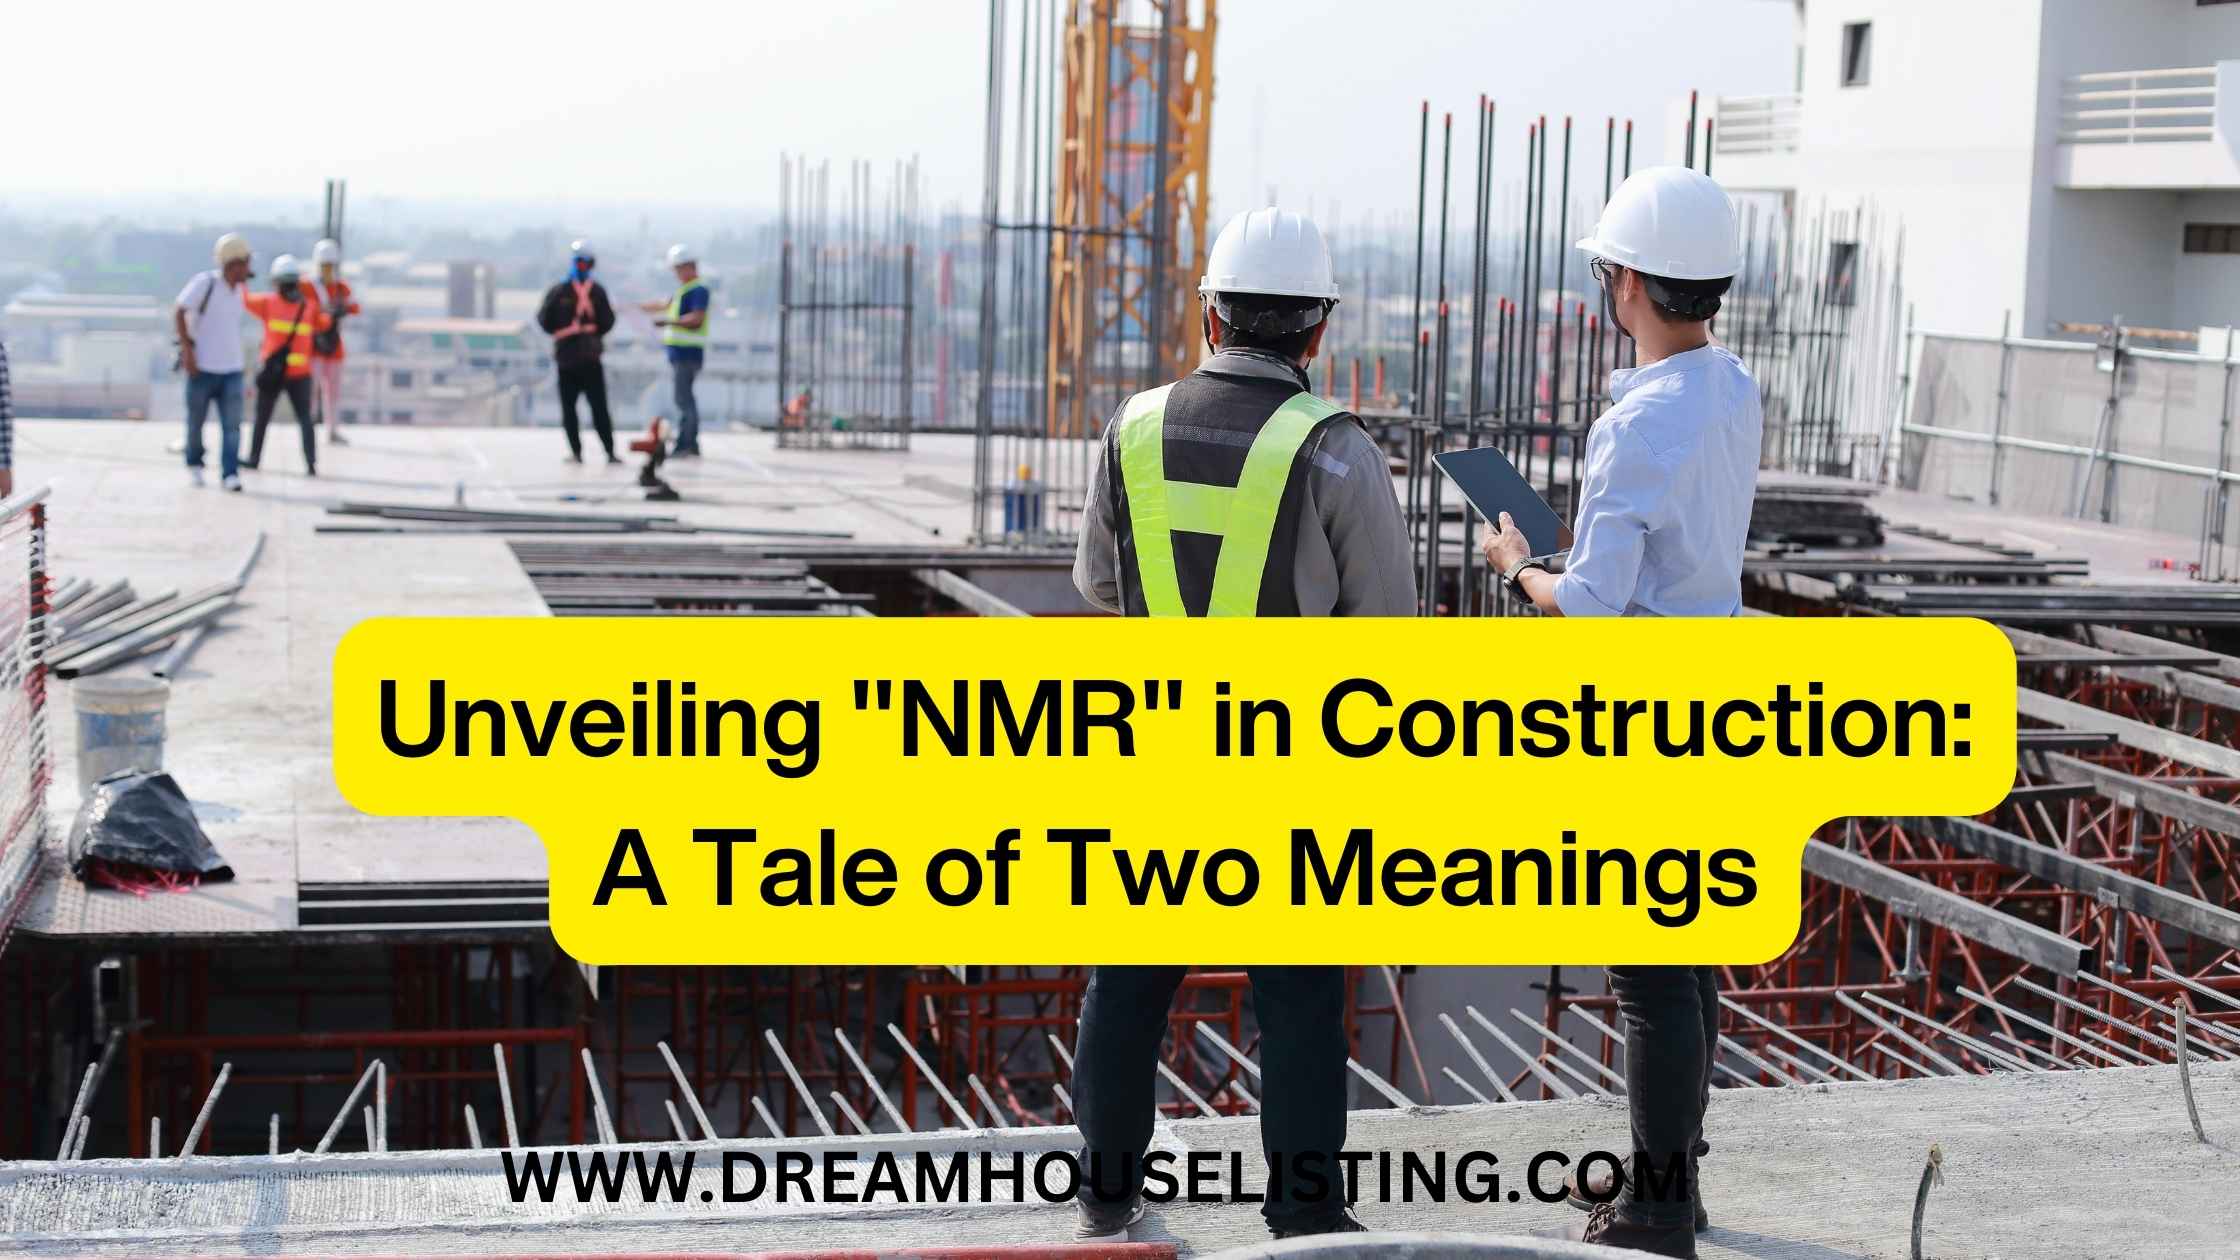 Unveiling "NMR" in Construction: A Tale of Two Meanings